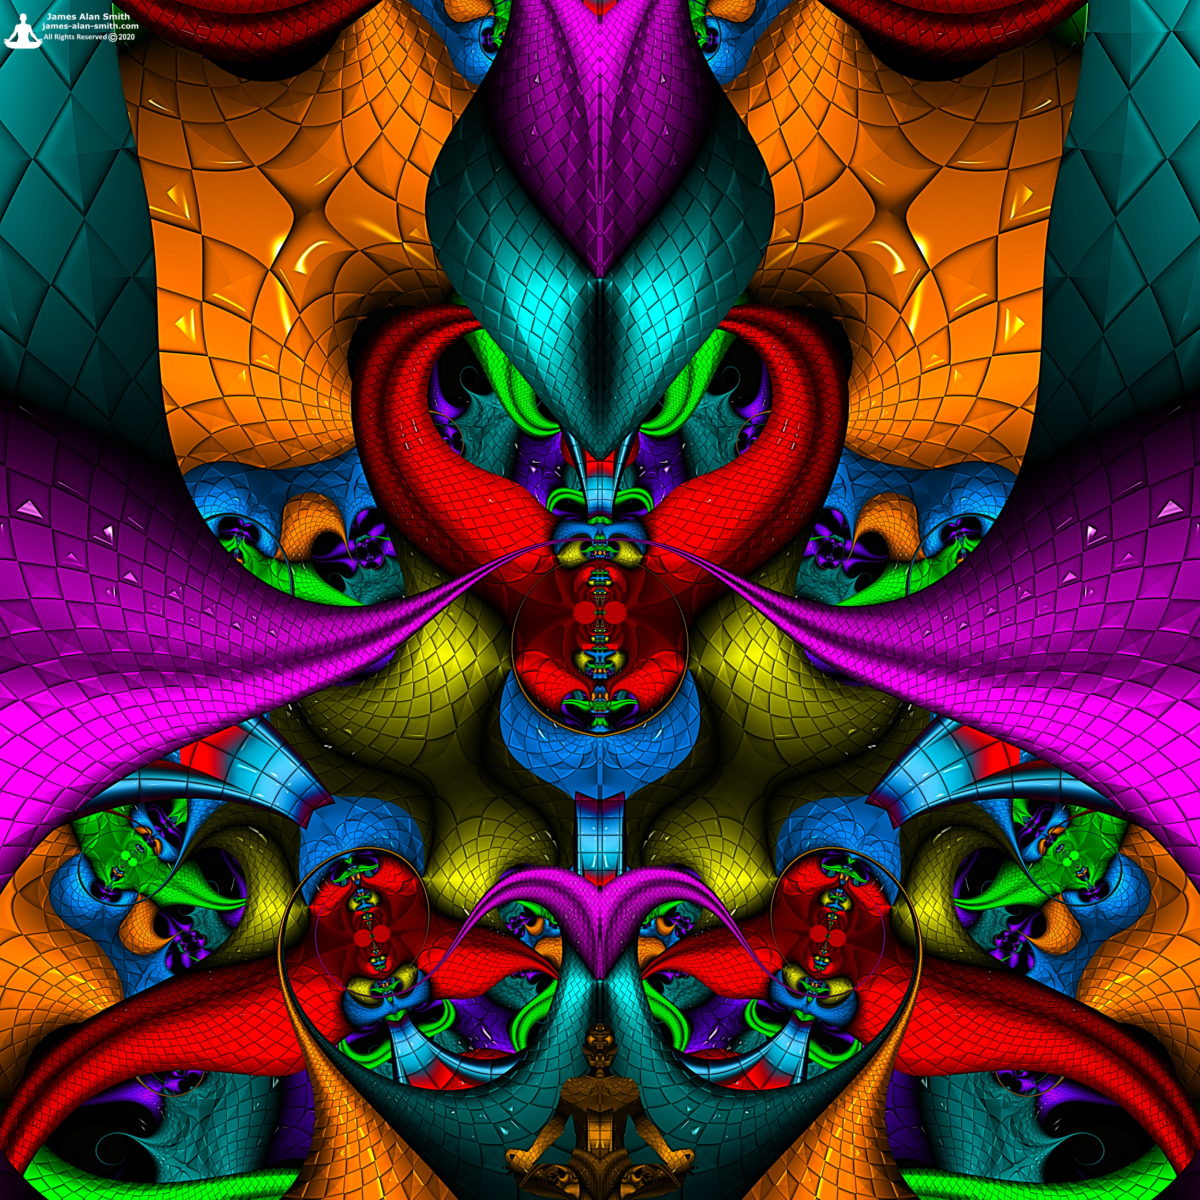 Meditations from Inside the Dragon's Lair: Artwork by James Alan Smith